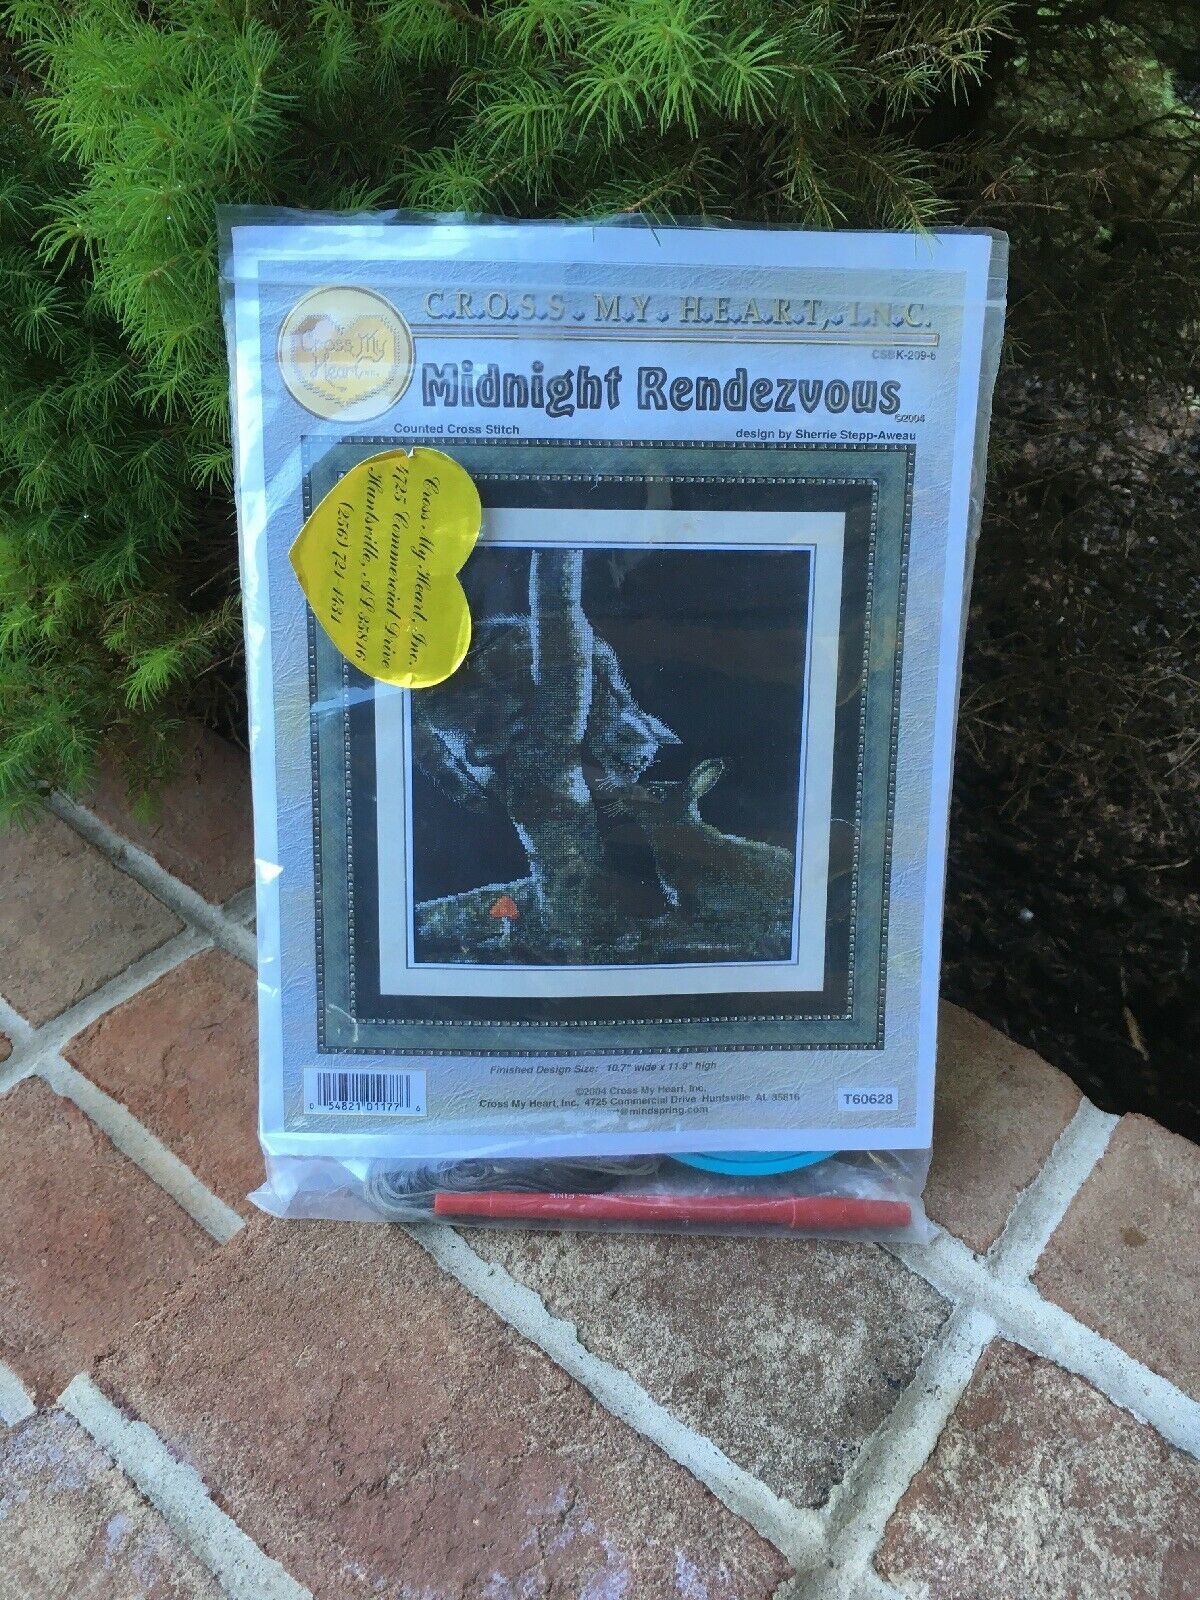 Midnight Rendezvous Cat & Bunny 2004 Cross My Heart Counted Cross Stitch Kit - $26.75